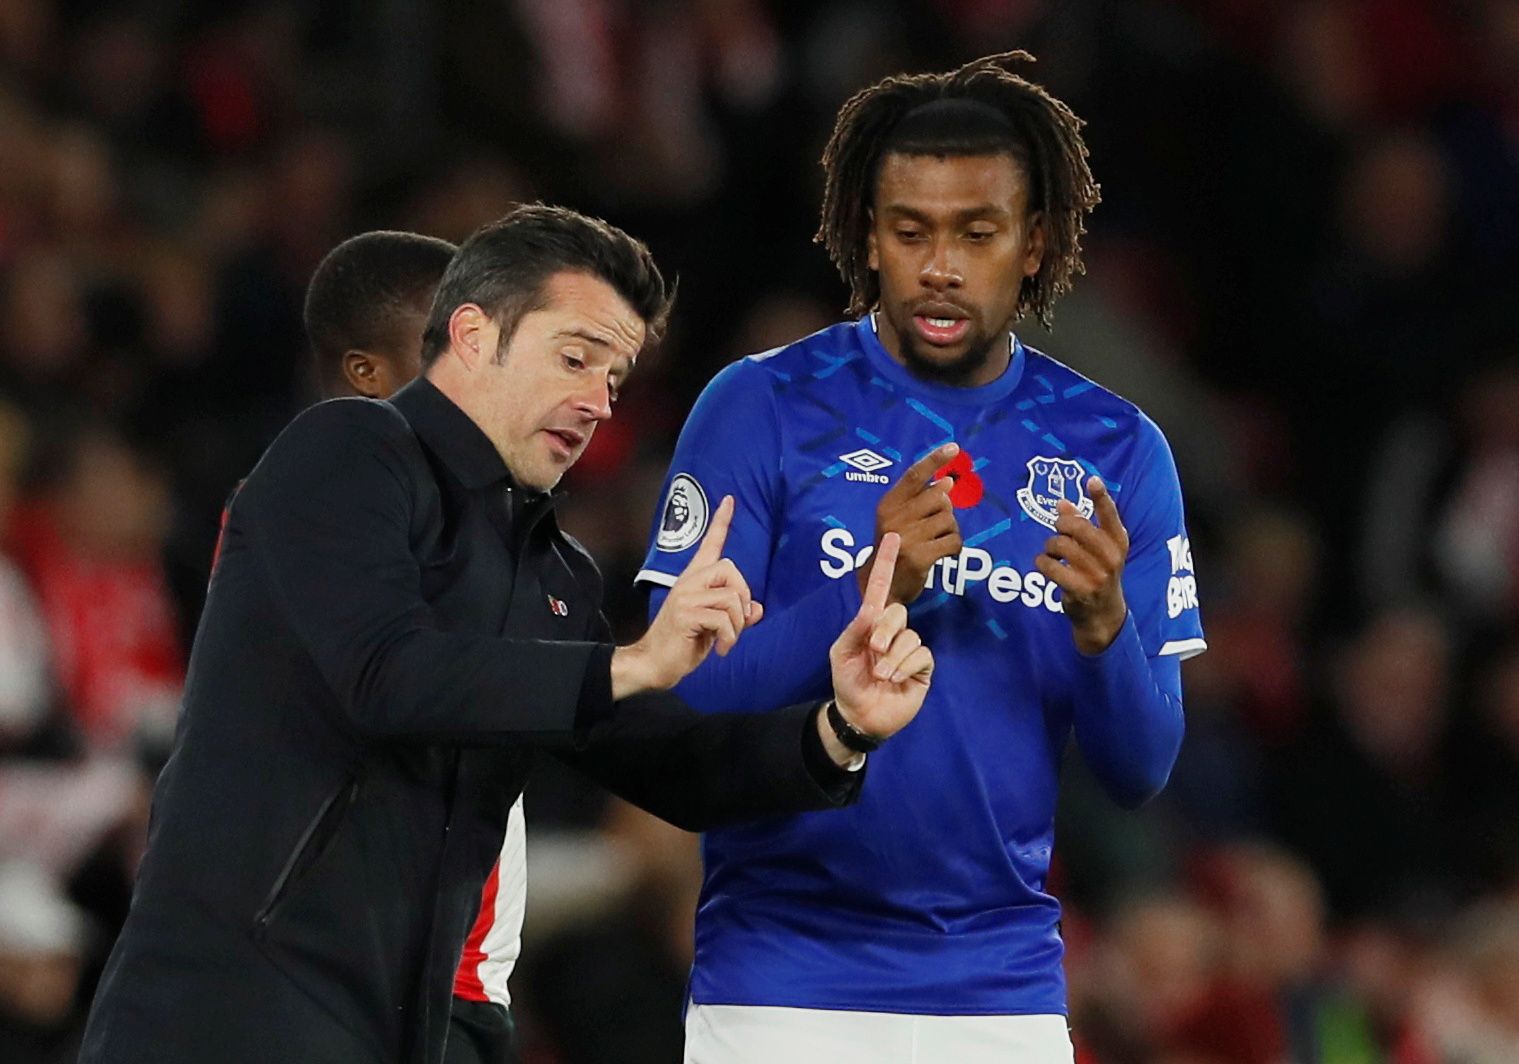 Soccer Football - Premier League - Southampton v Everton - St Mary's Stadium, Southampton, Britain - November 9, 2019  Everton manager Marco Silva speaks with Everton's Alex Iwobi                 REUTERS/David Klein  EDITORIAL USE ONLY. No use with unauthorized audio, video, data, fixture lists, club/league logos or 